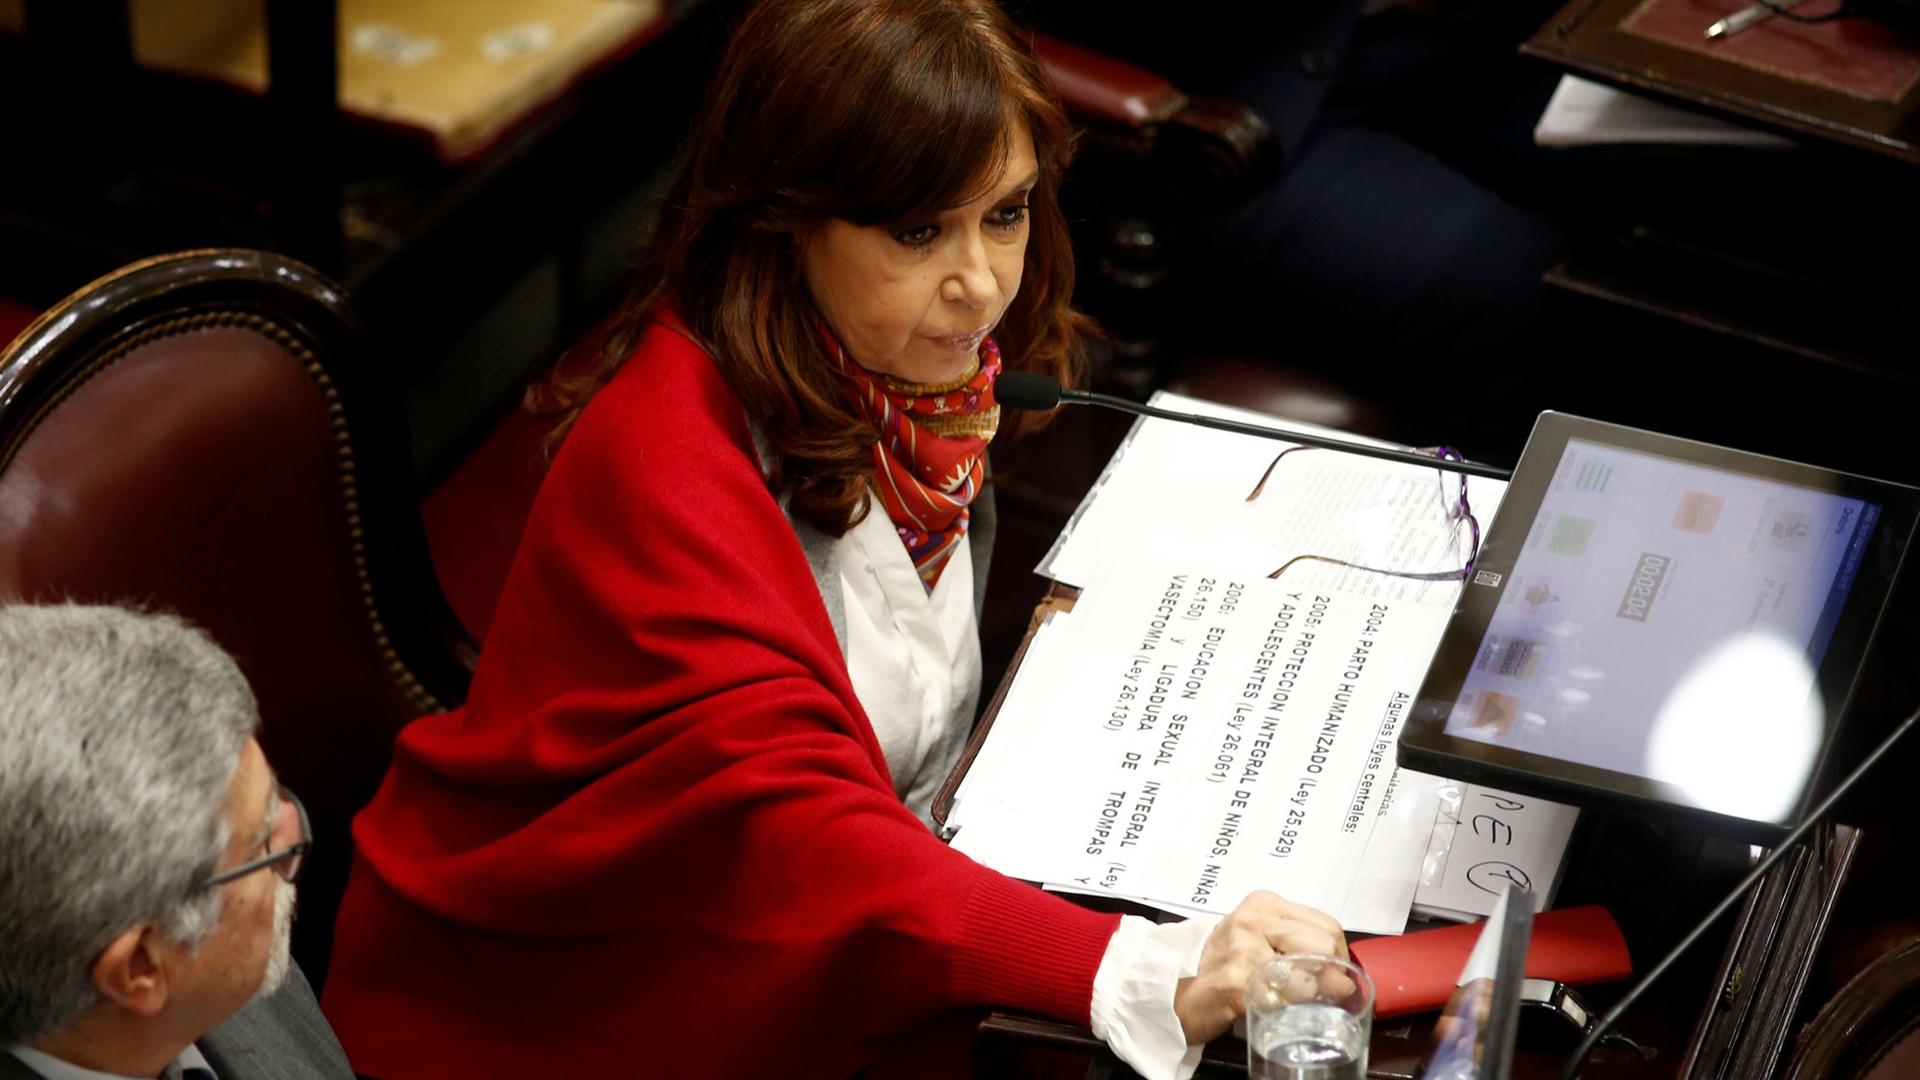 Senator and former Argentine President Cristina Fernandez de Kirchner sits next to Senator Marcelo Fuentes as lawmakers debated a bill that would have legalized abortion, in Buenos Aires, Argentina, August 9, 2018.